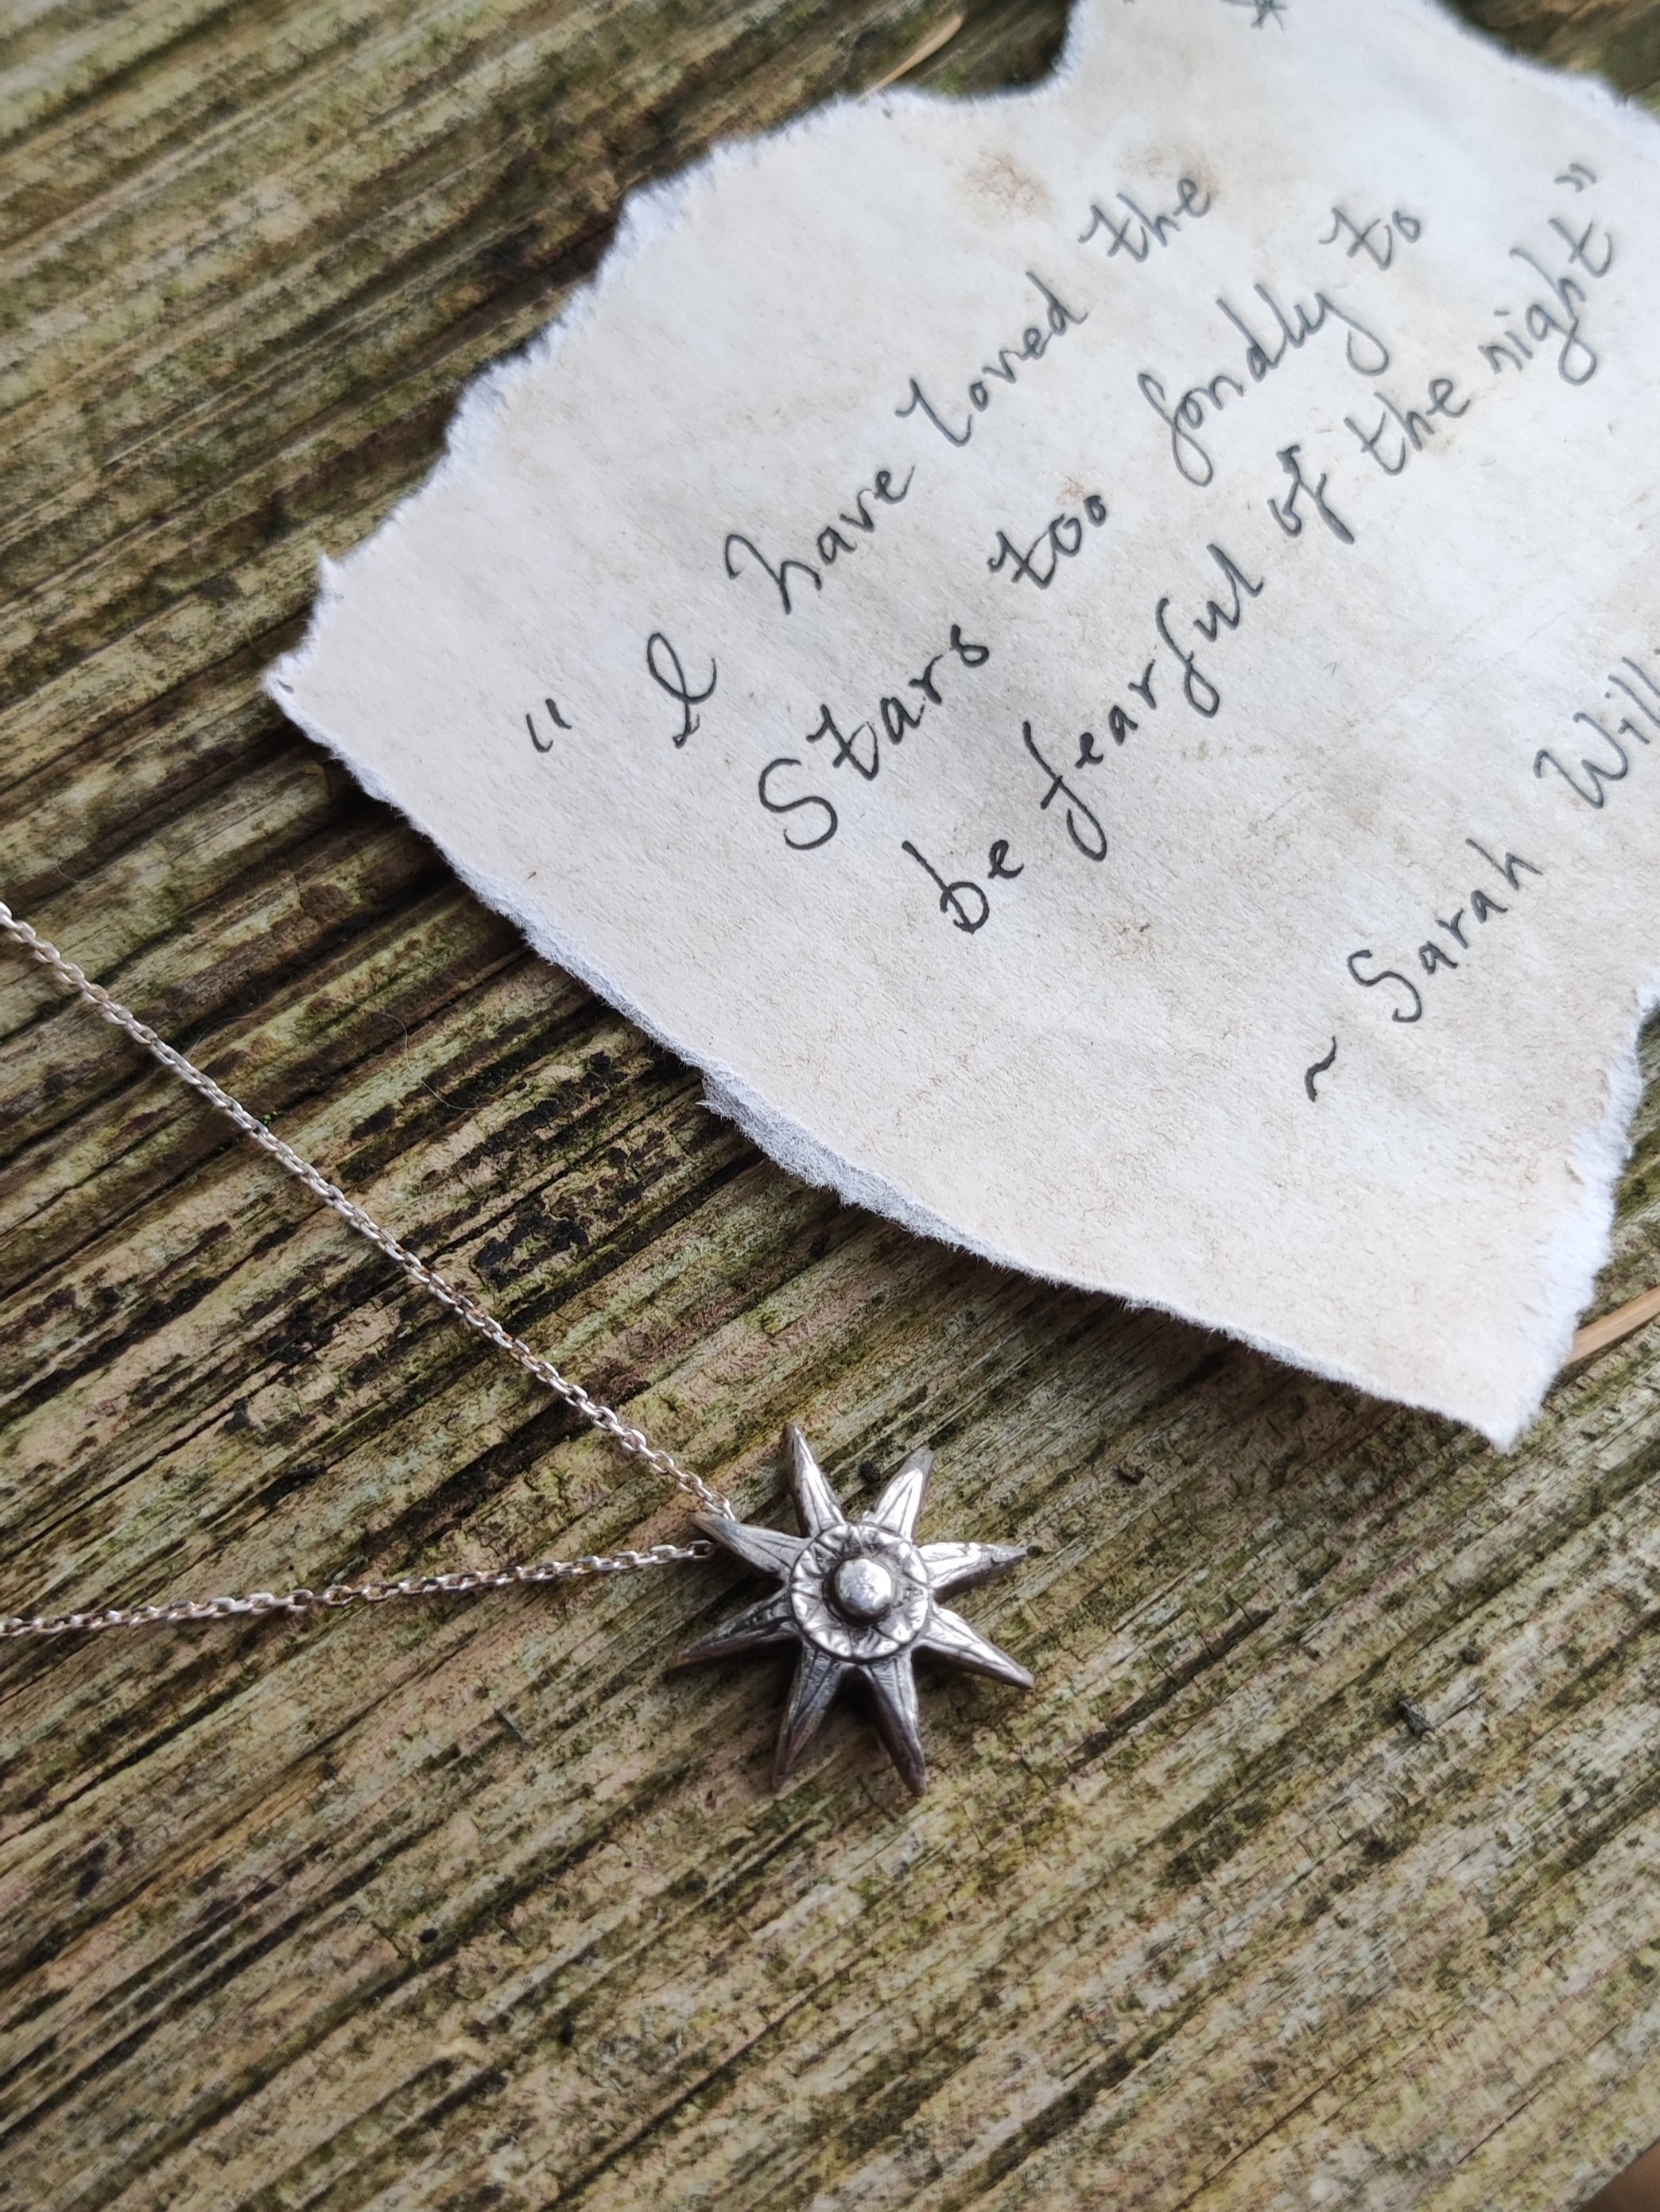 ' Loved the Stars' ~ Silver pendant